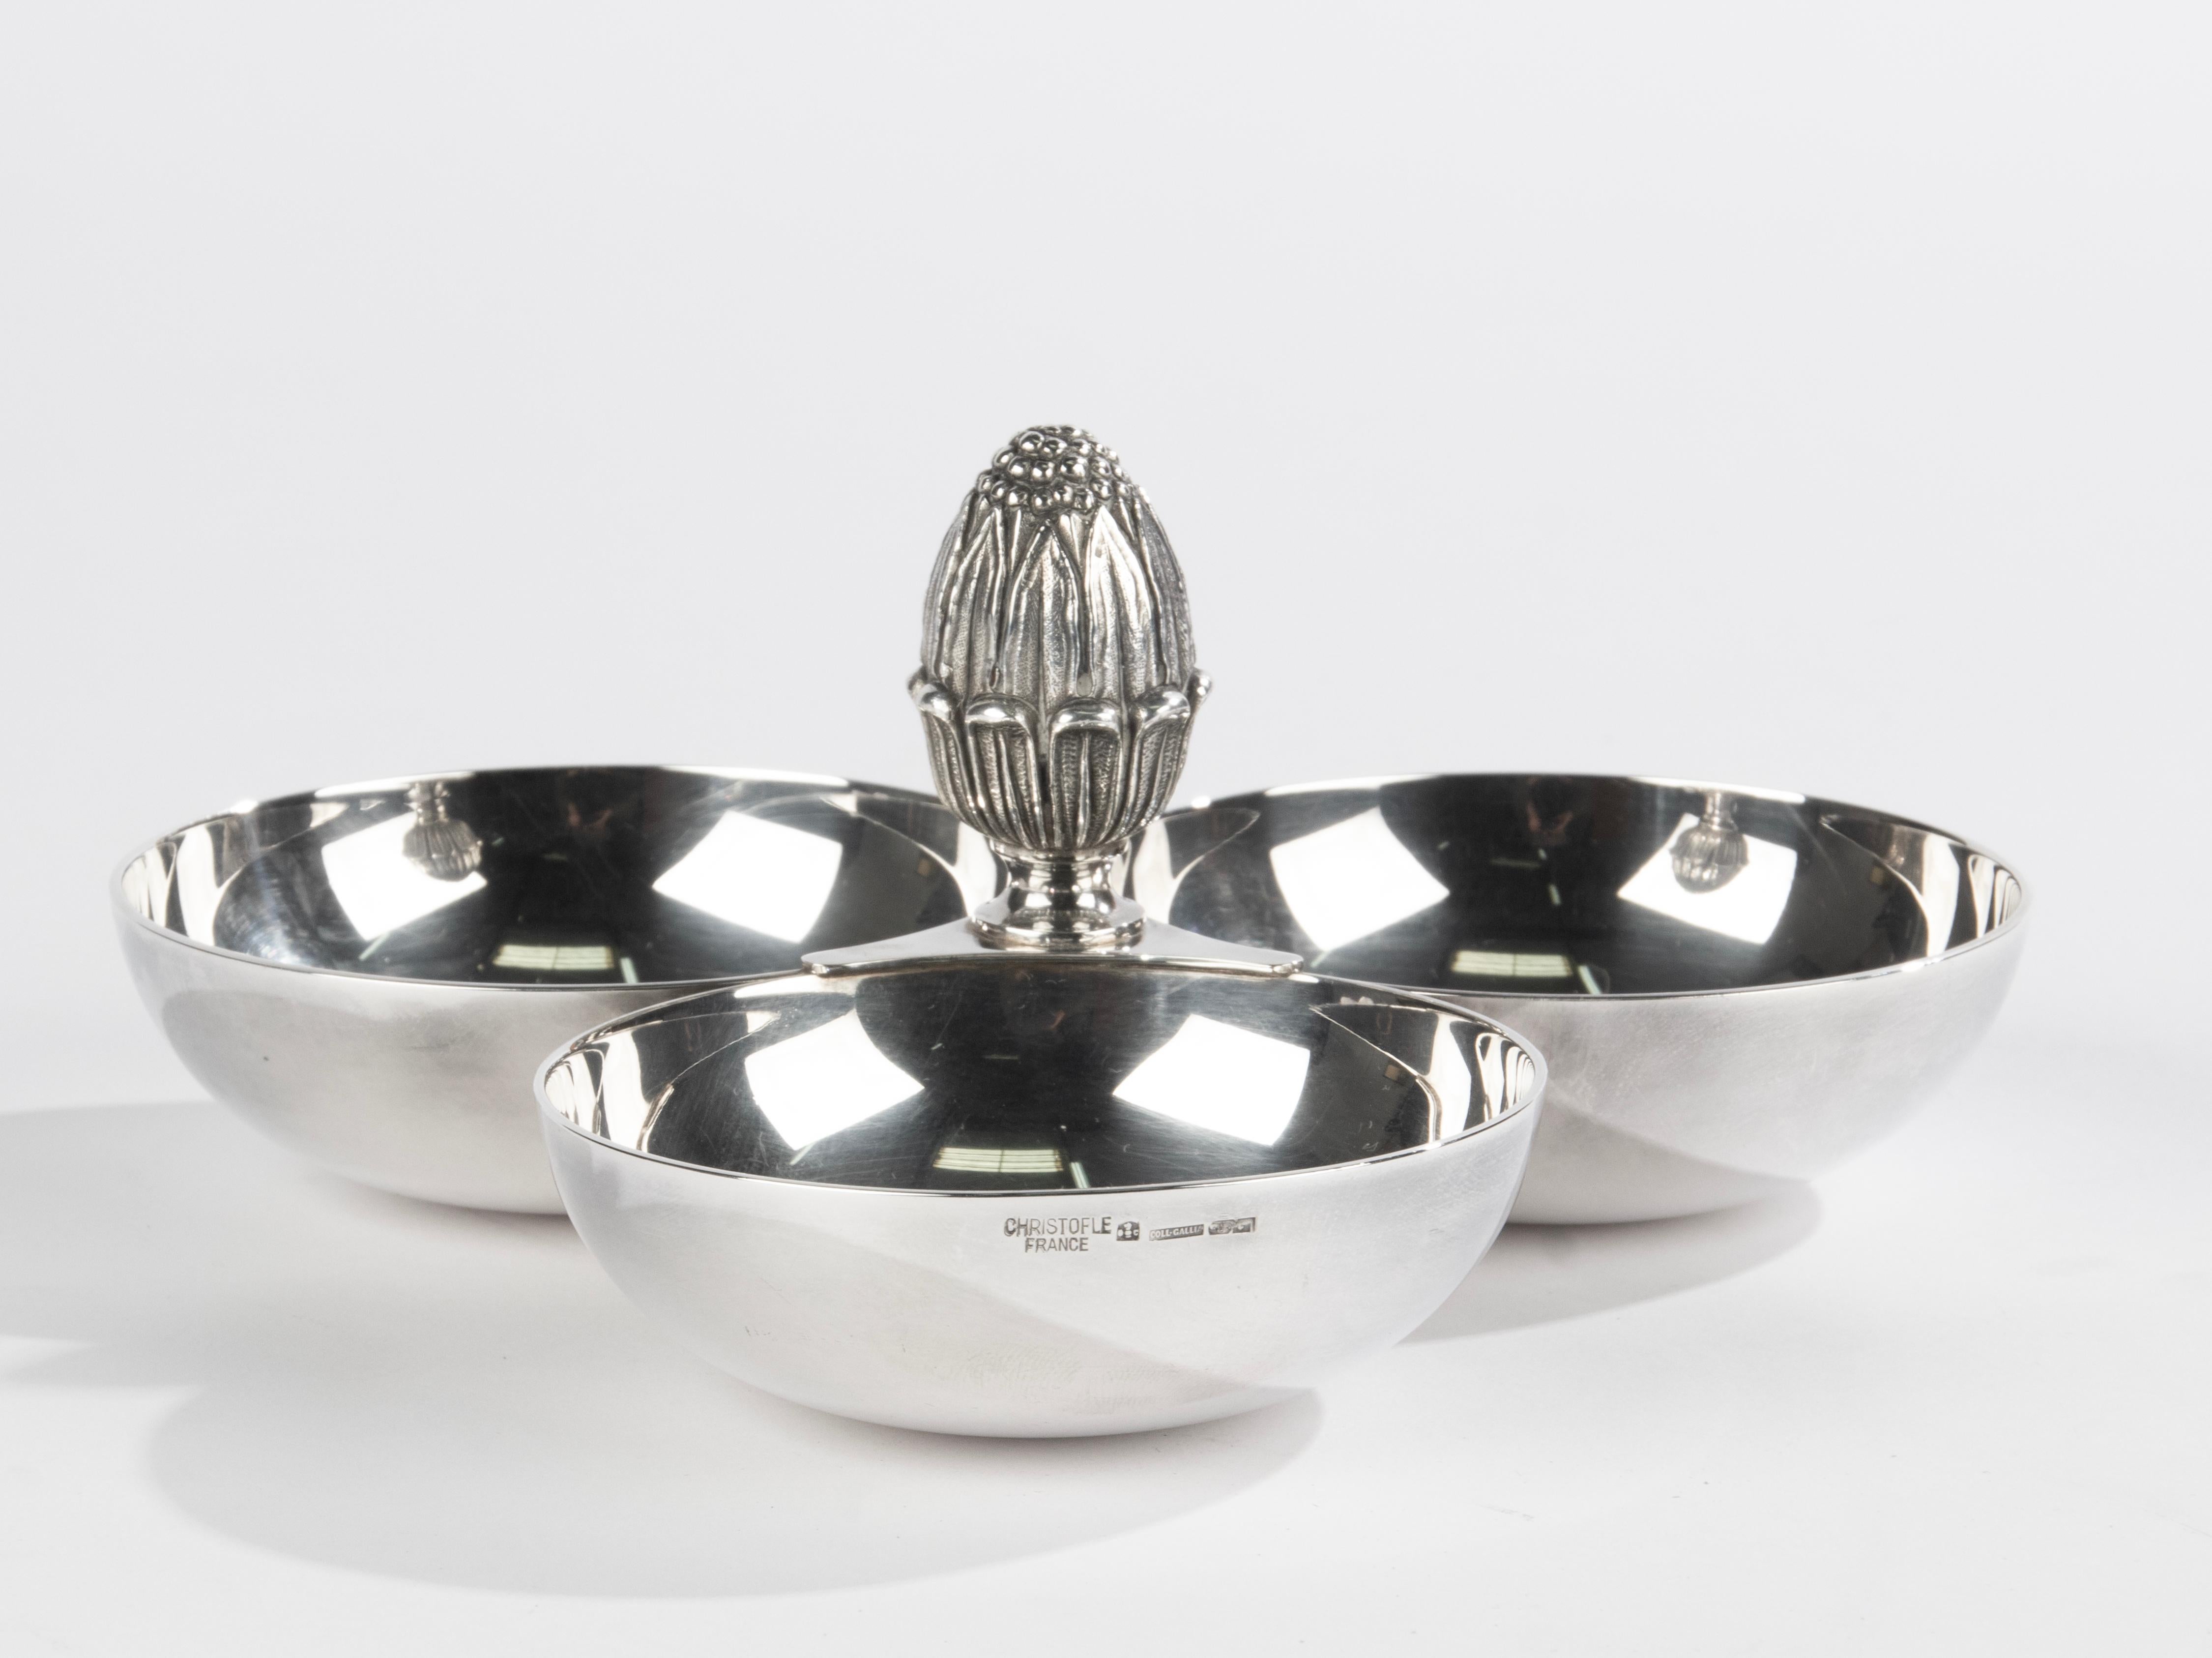 French Silver Plated Serving Bowl - Christofle 